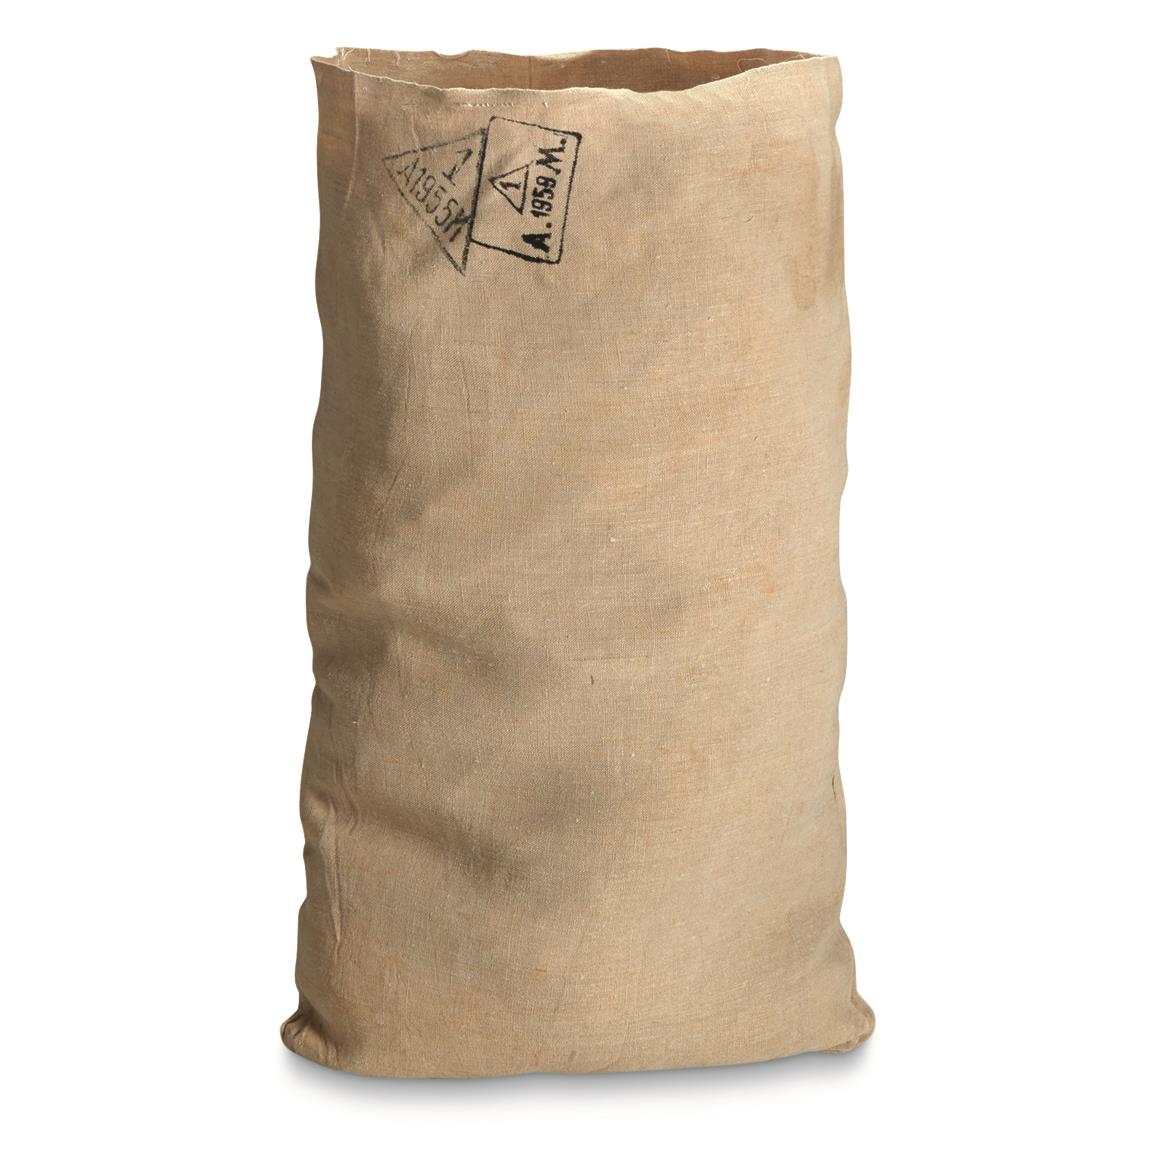 Italian Military Surplus Linen Canvas Bags, 10 Pack, Used